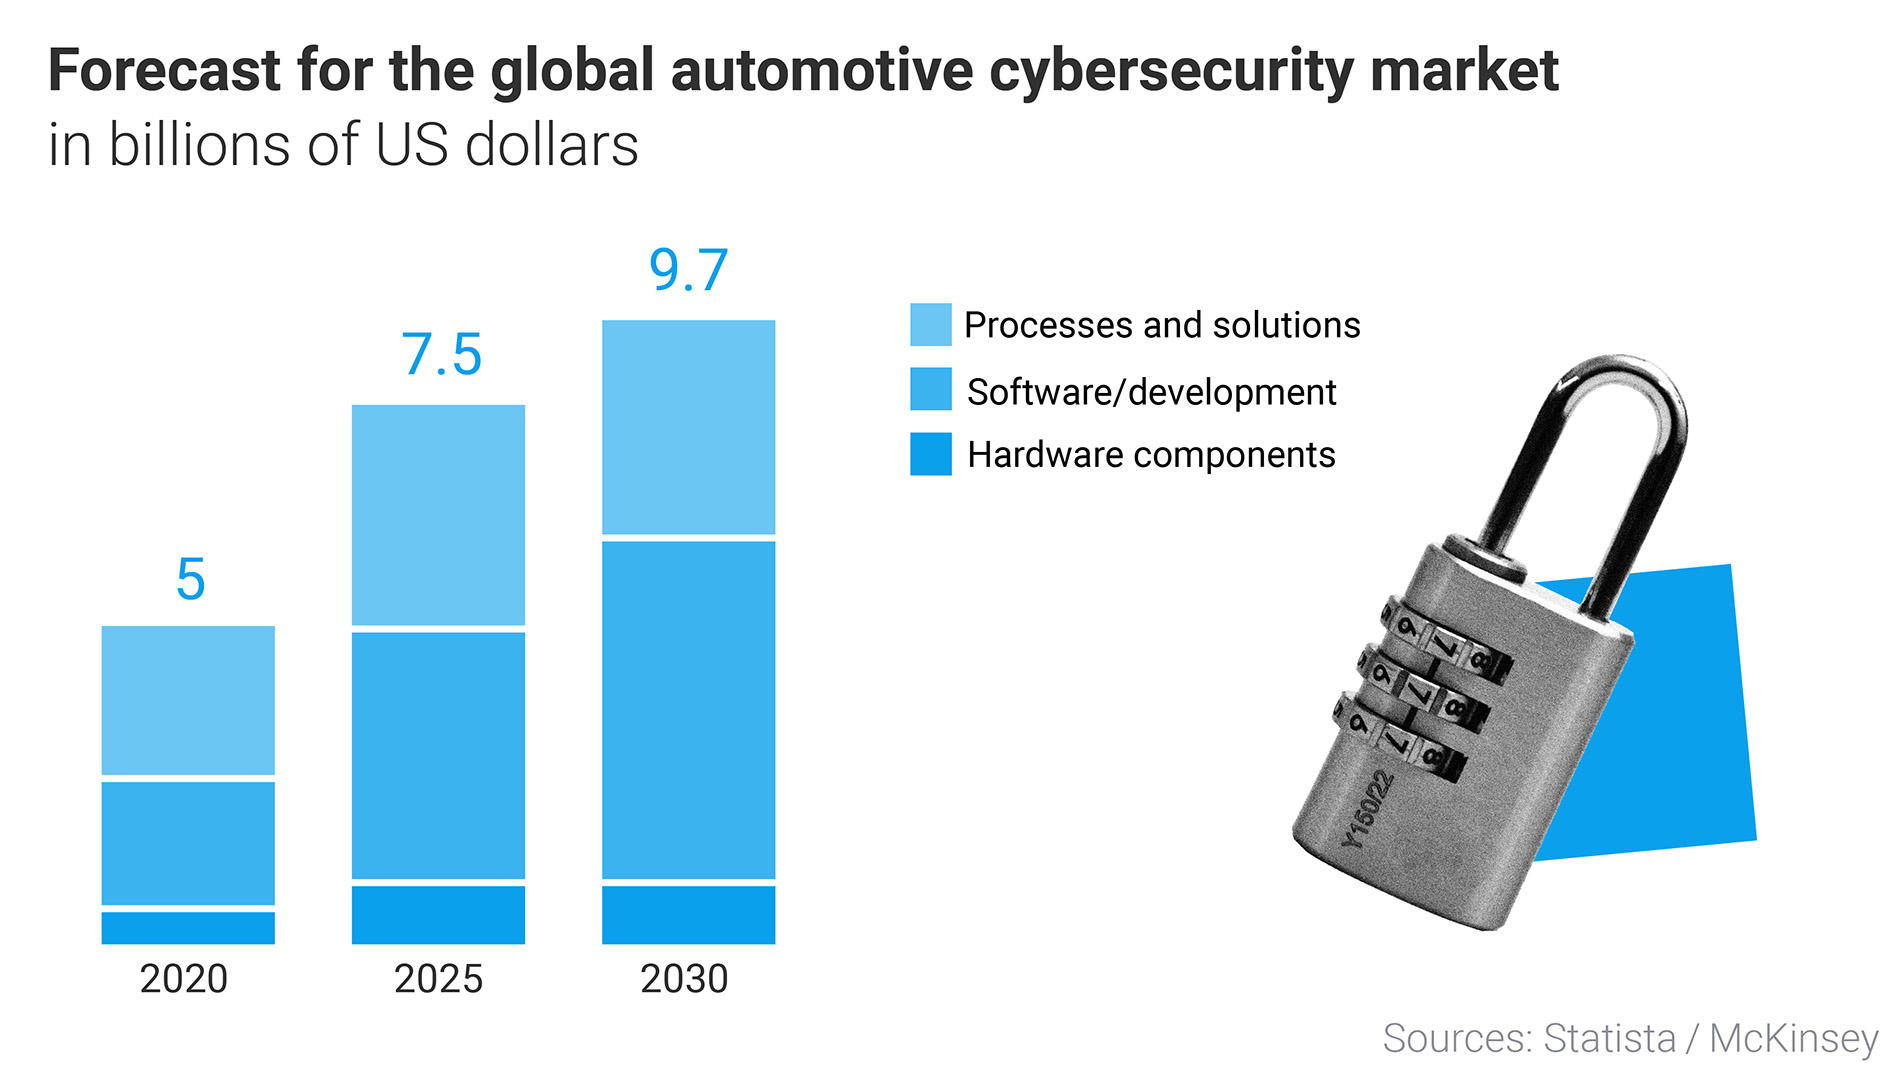 The cybersecurity market